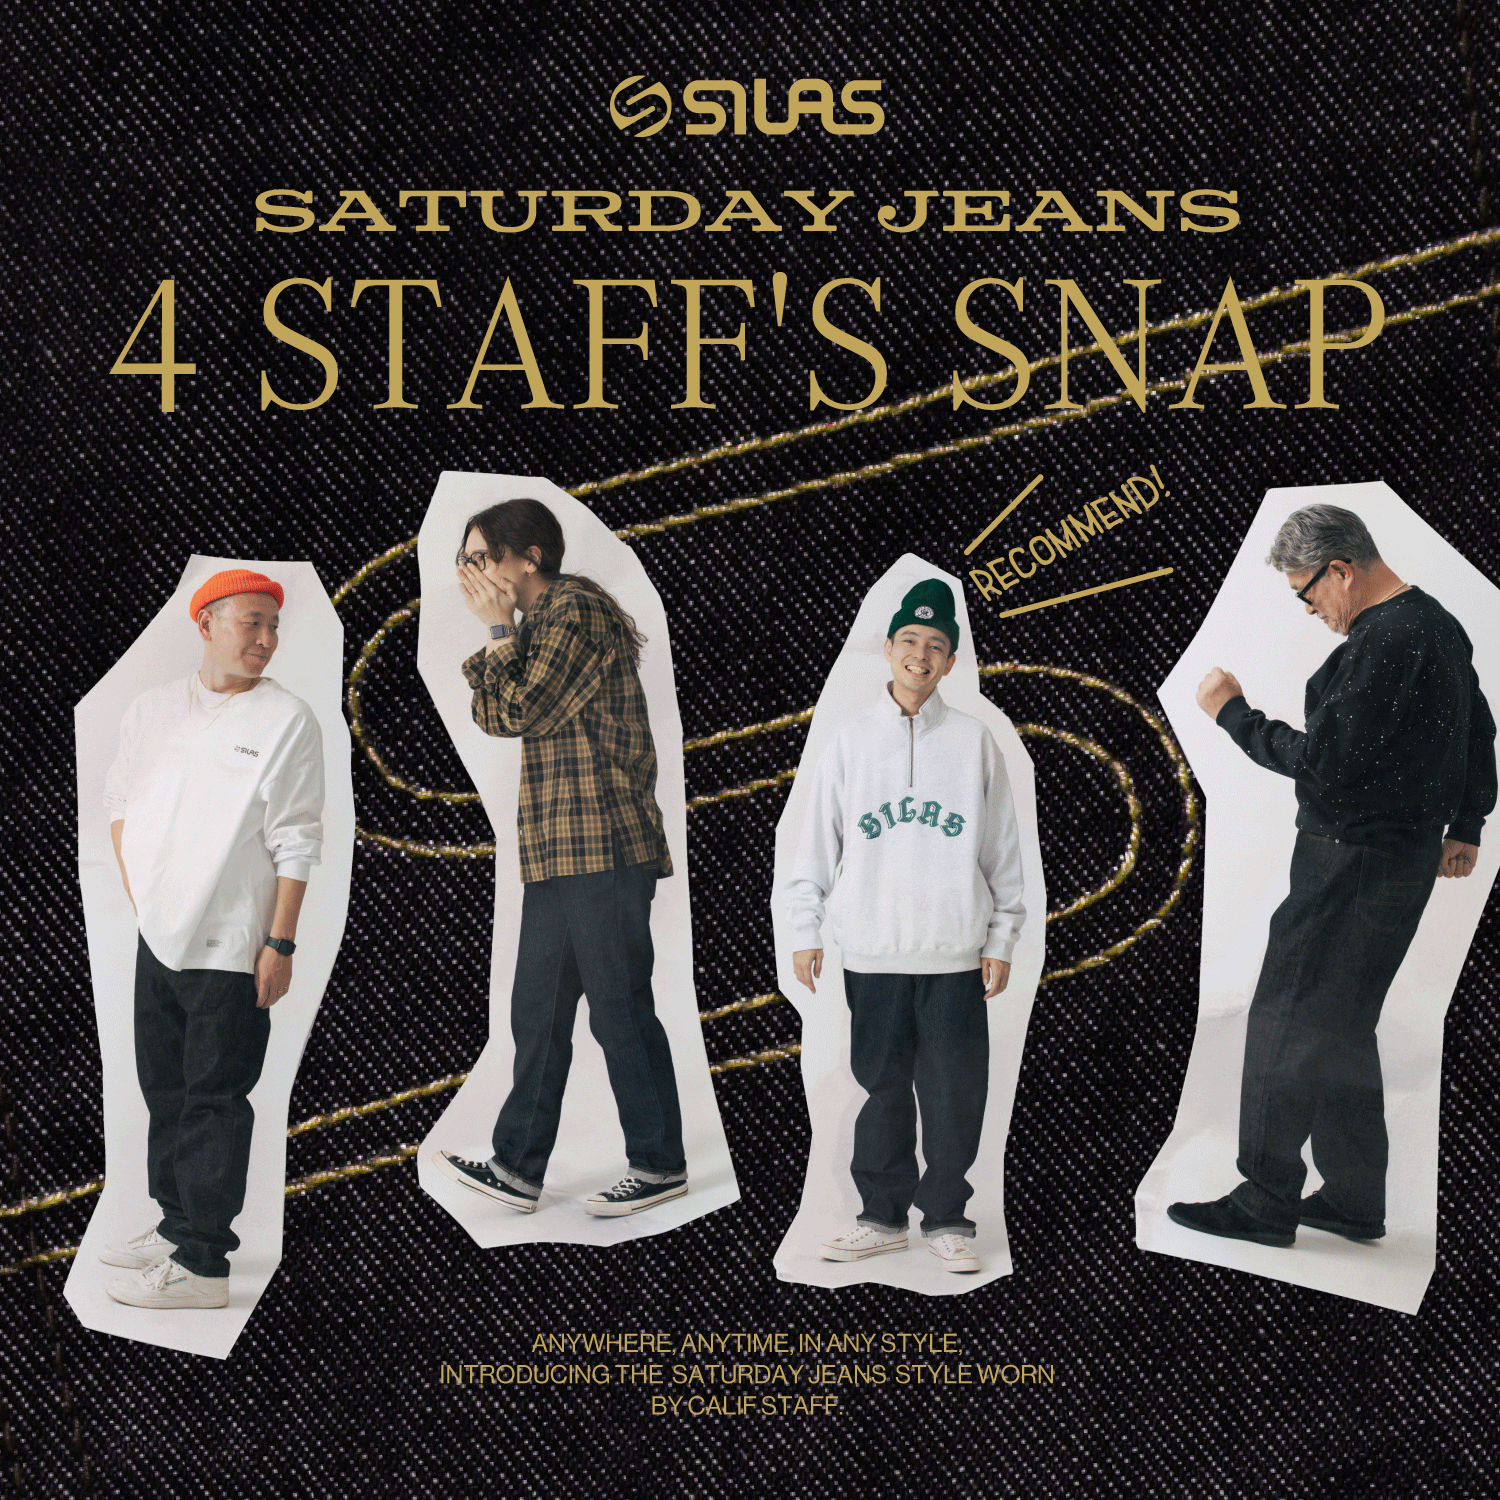 SILAS SATURDAY JEANS 4STAFF'S SNAP